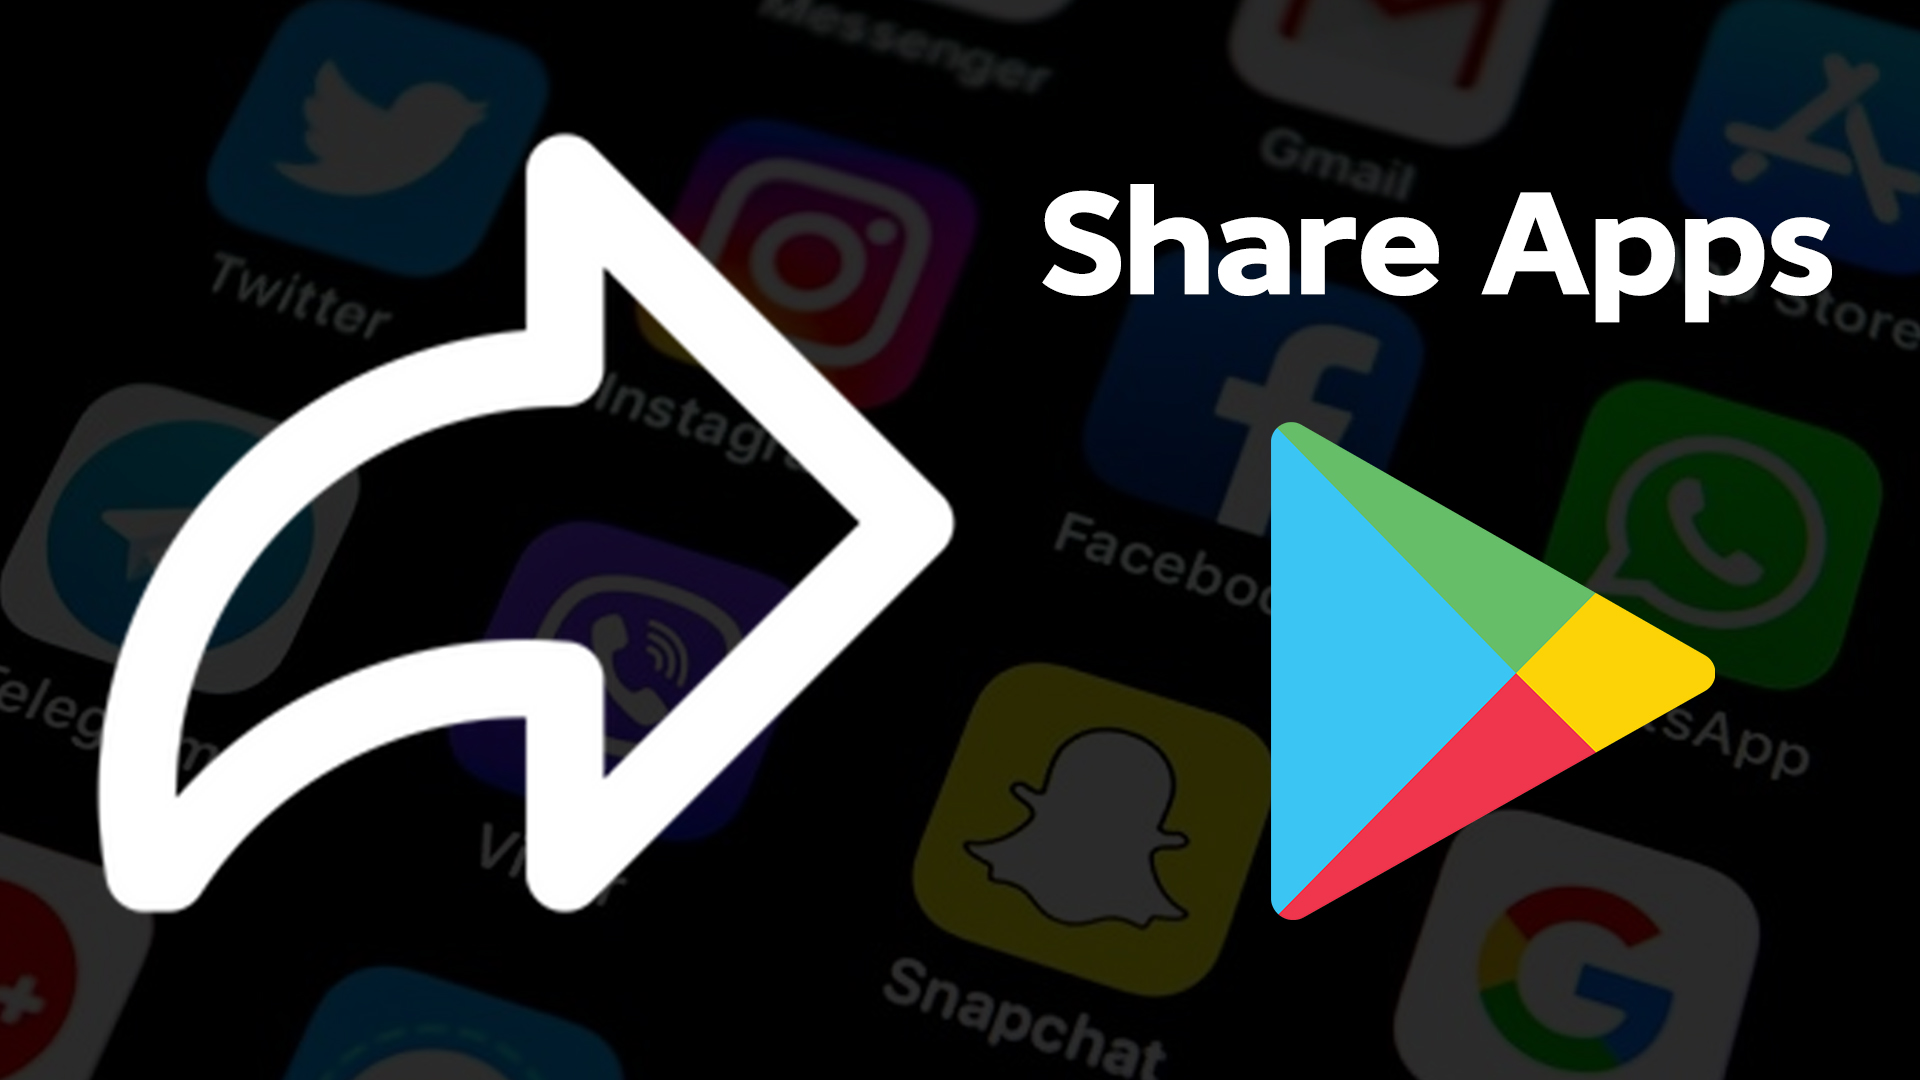 Play store's amazing feature Share apps without Internet